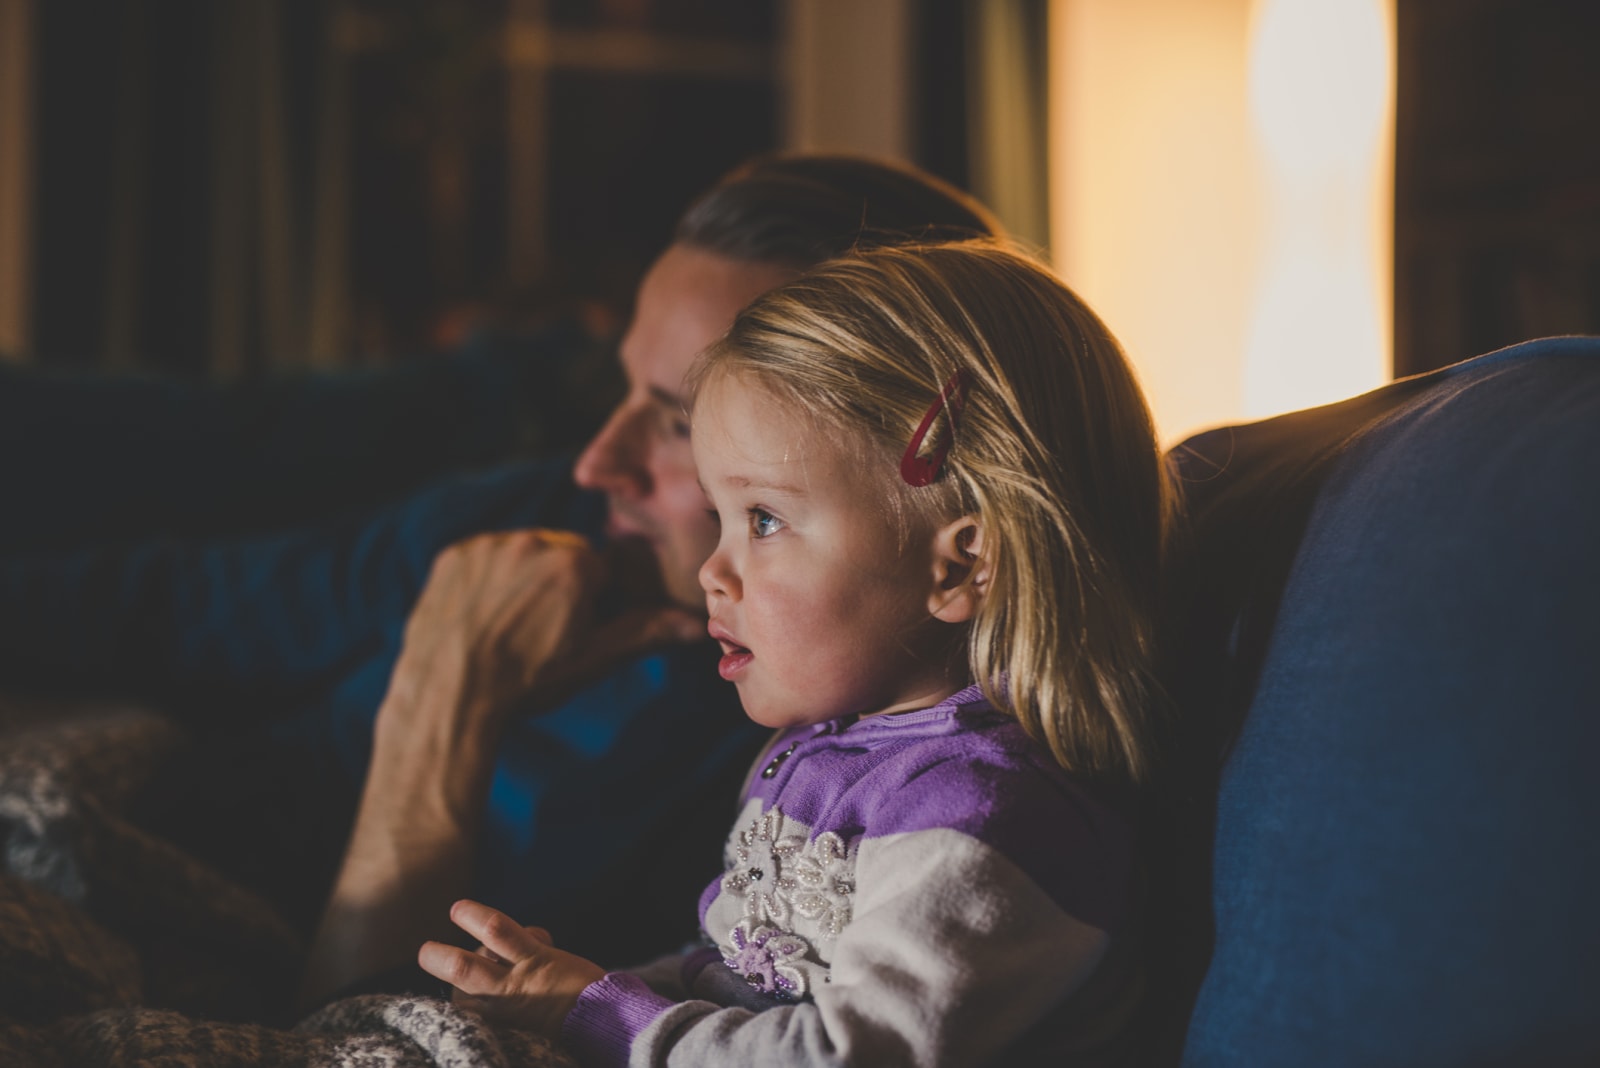 father and daughter sitting on couch watching TV together